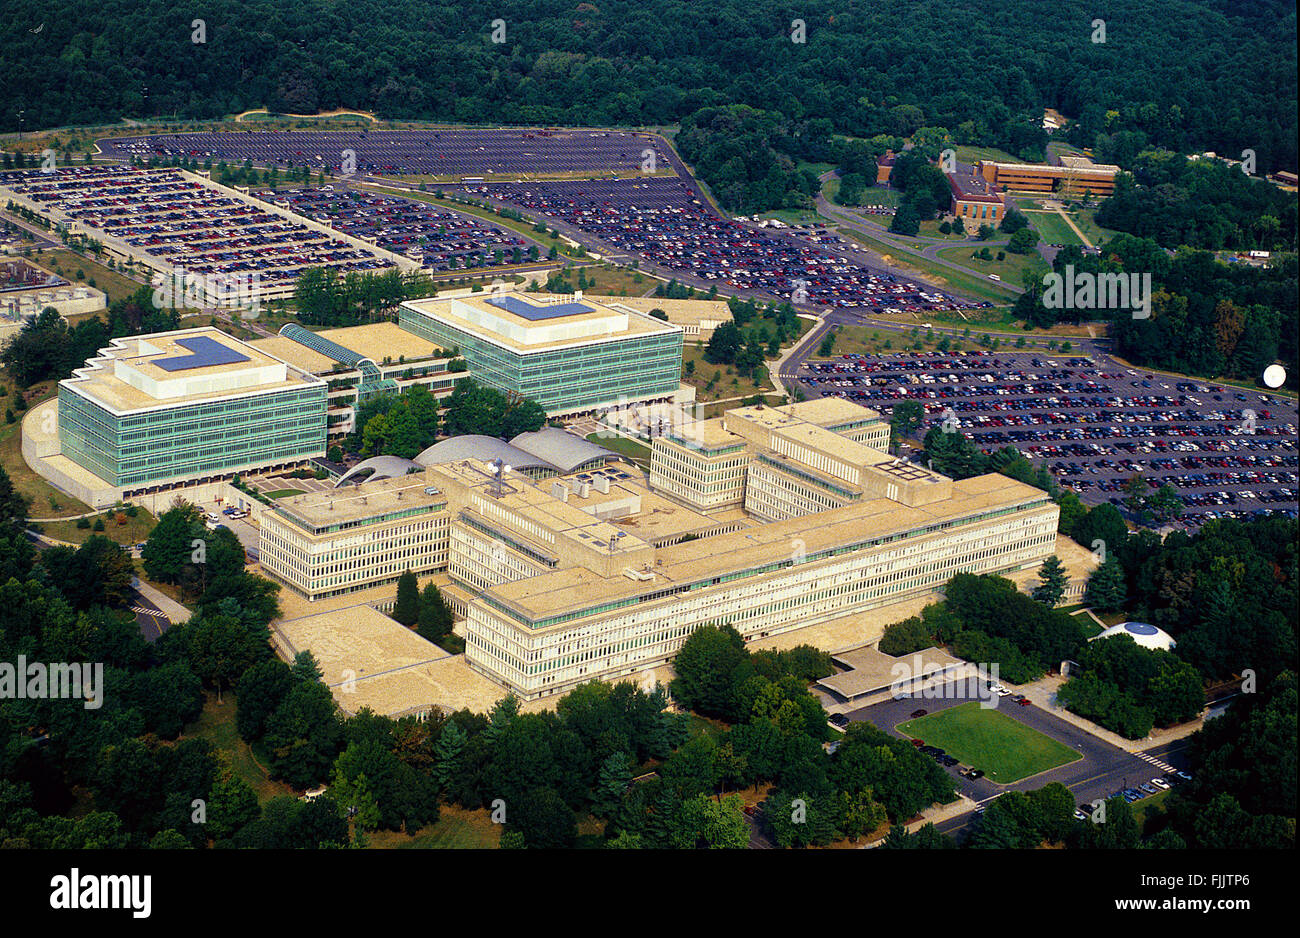 McLean, Virginia, USA, 1991 Aerial view of the CIA headquarters buildings in McLean, Virginia a few miles west of Washington DC. The Central Intelligence Agency (CIA) is one of the principal intelligence gathering agencies of the United States federal government. It's employees operate from U.S. embassies and many other locations around the world. The only independent U.S. intelligence agency, it reports to the Director of National Intelligence.The CIA has three traditional principal activities, which are gathering information about foreign governments, corporations. Credit: Mark Reinstein Stock Photo